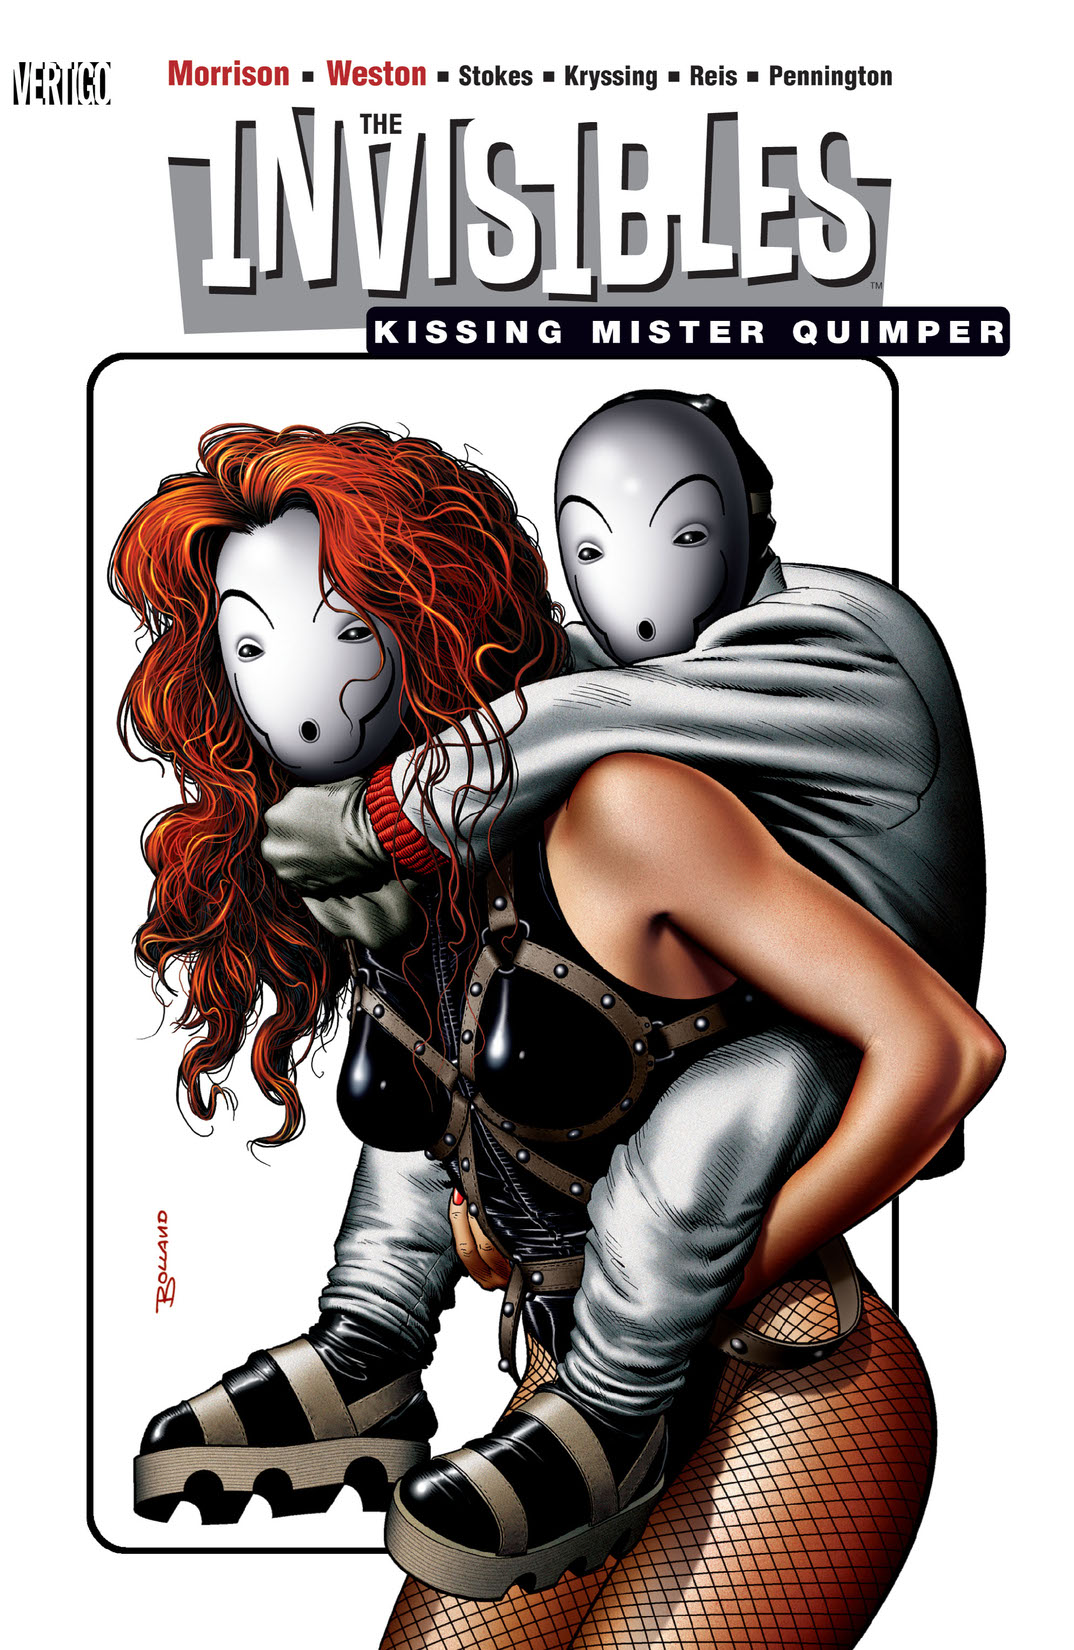 The Invisibles Vol. 6: Kissing Mister Quimper preview images